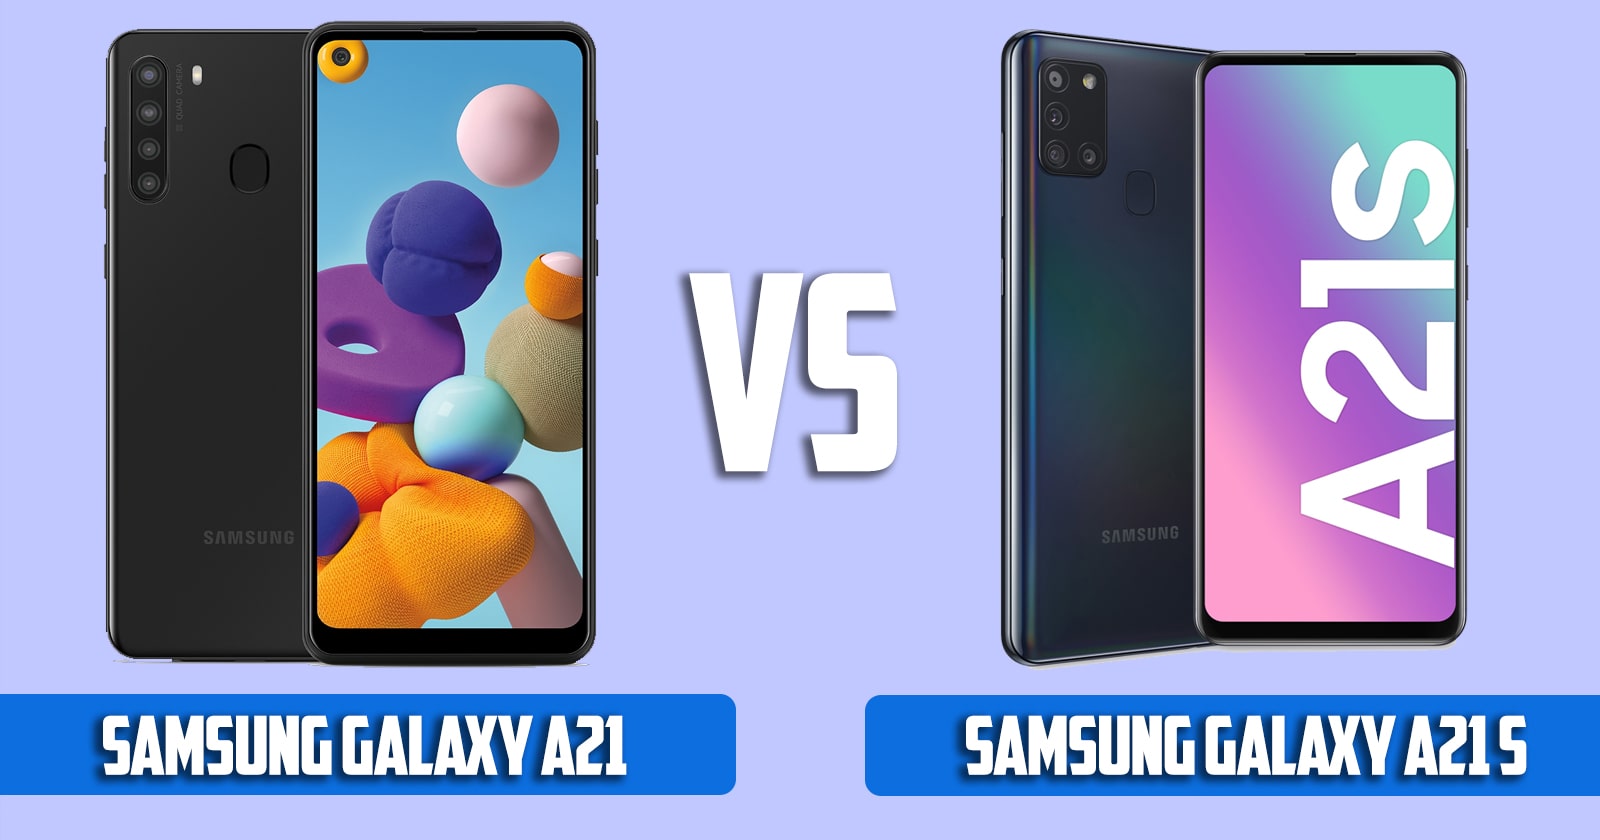 What is the difference between Samsung galaxy a21 and a21s